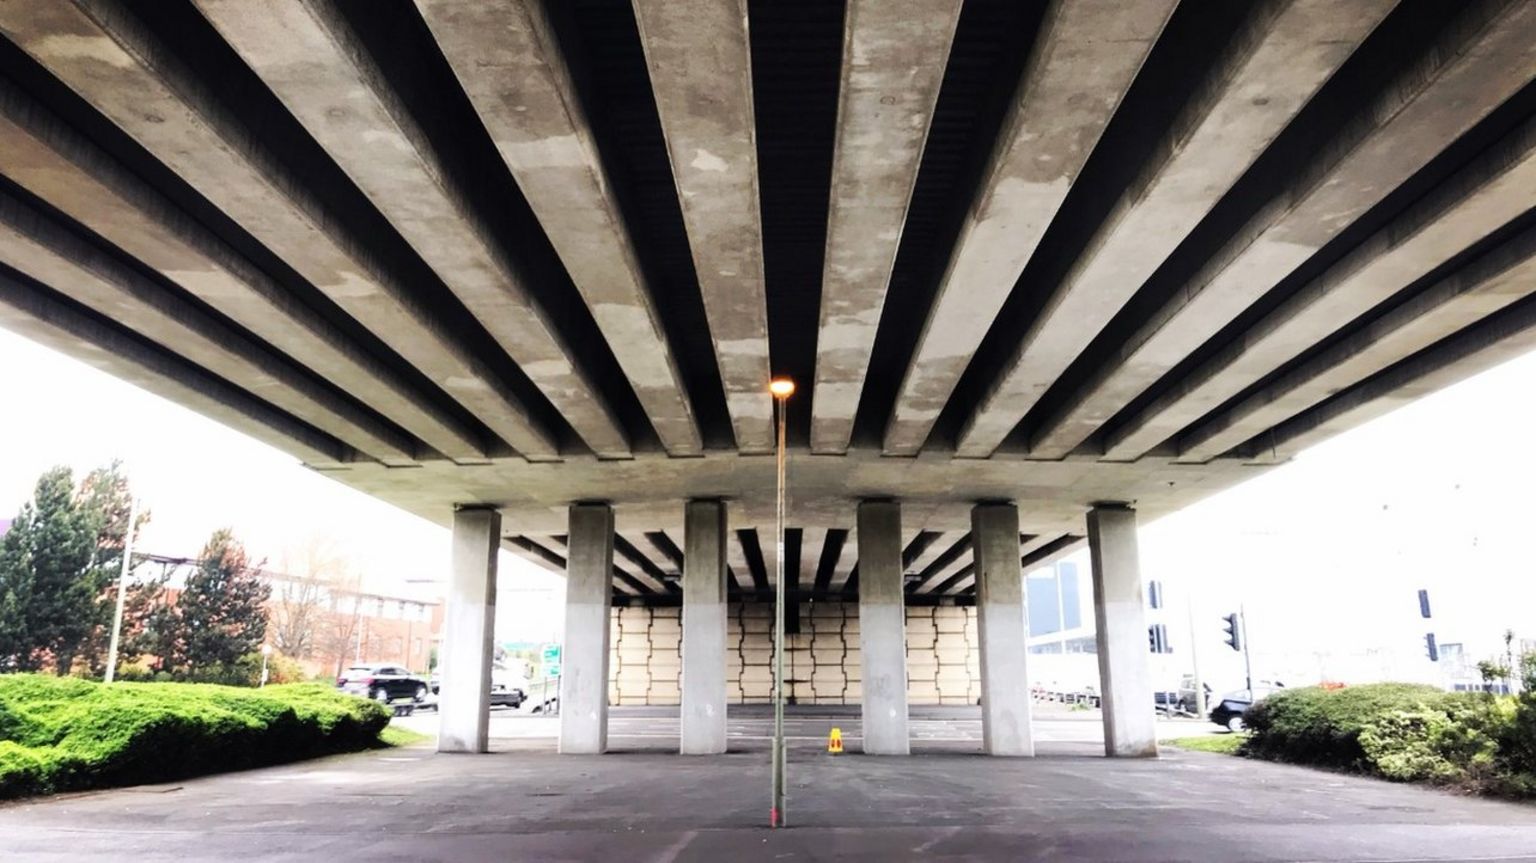 Under the Oxford ring road flyover in Cowley